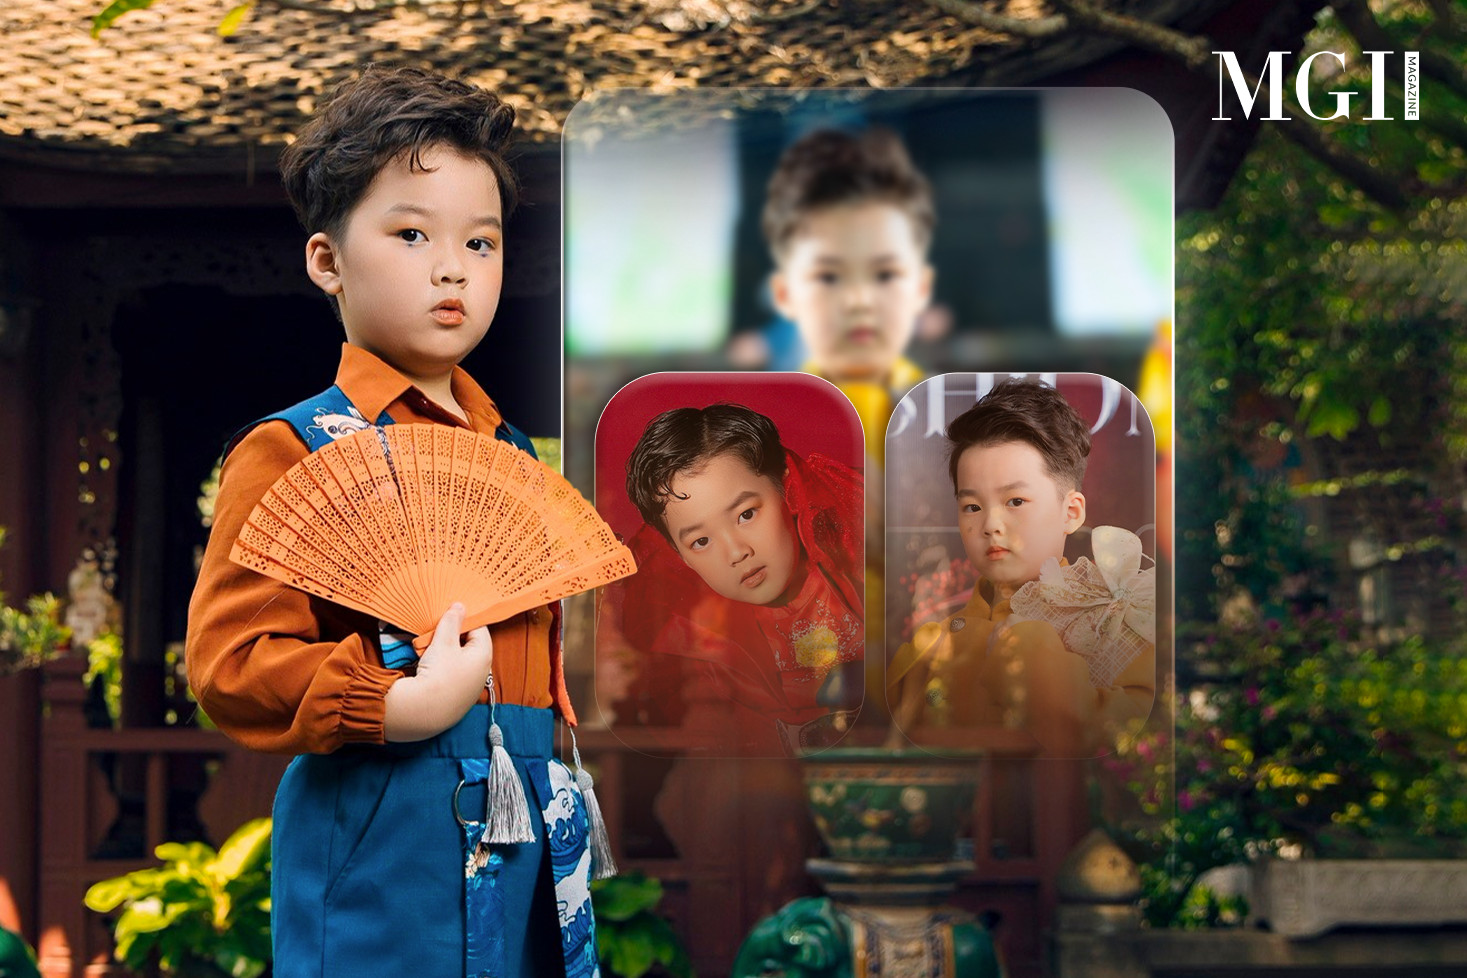 "OVERSEAS VIETNAMESE" HOANG MINH OVERCOMES THOUSANDS OF CHILD MODELS TO BECOME VIJFW 2024 IMAGE REPRESENTATIVE